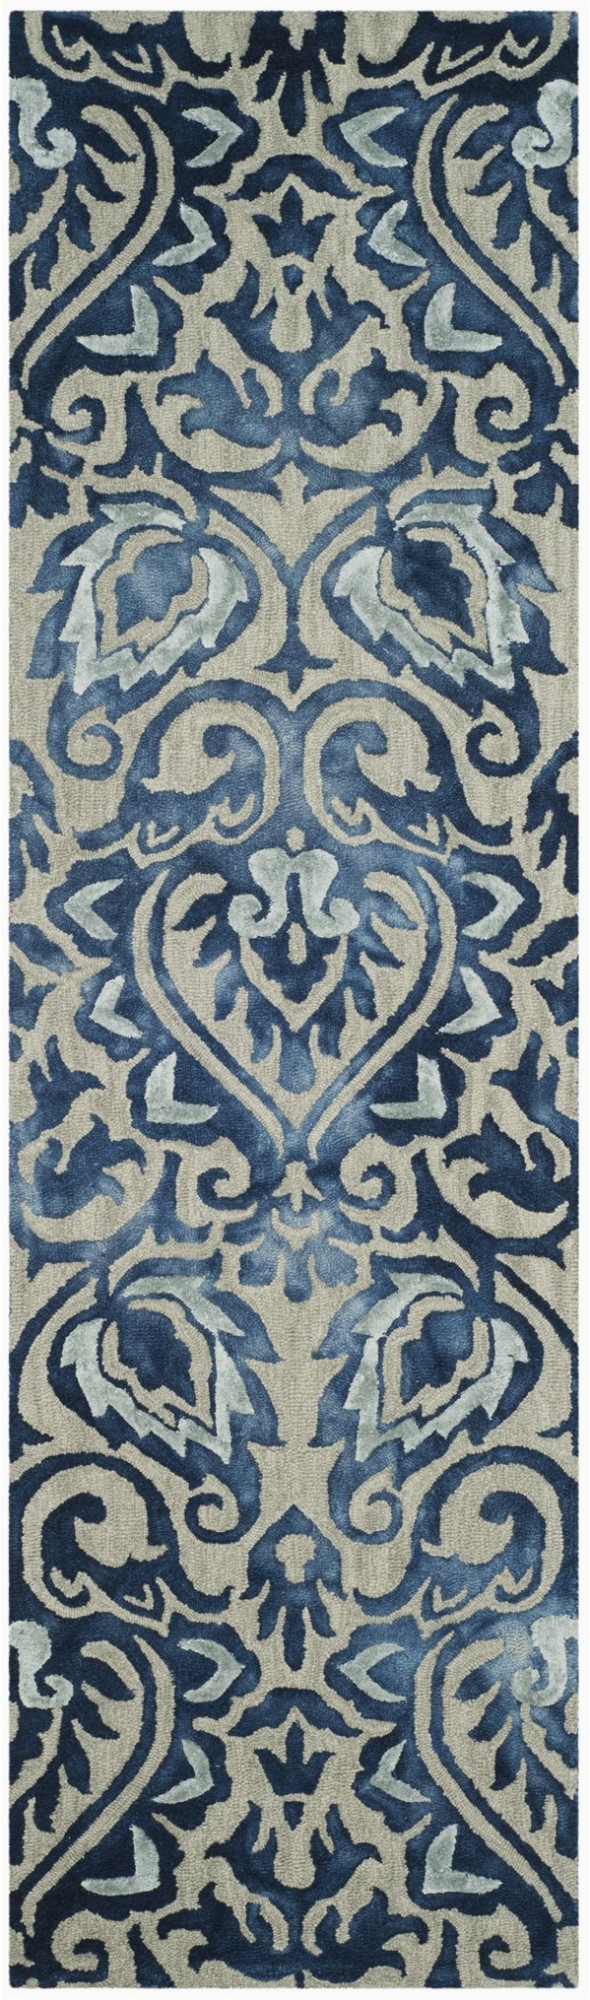 Royal Blue and Gold area Rug Safavieh Dip Dye Ddy 511 area Rugs